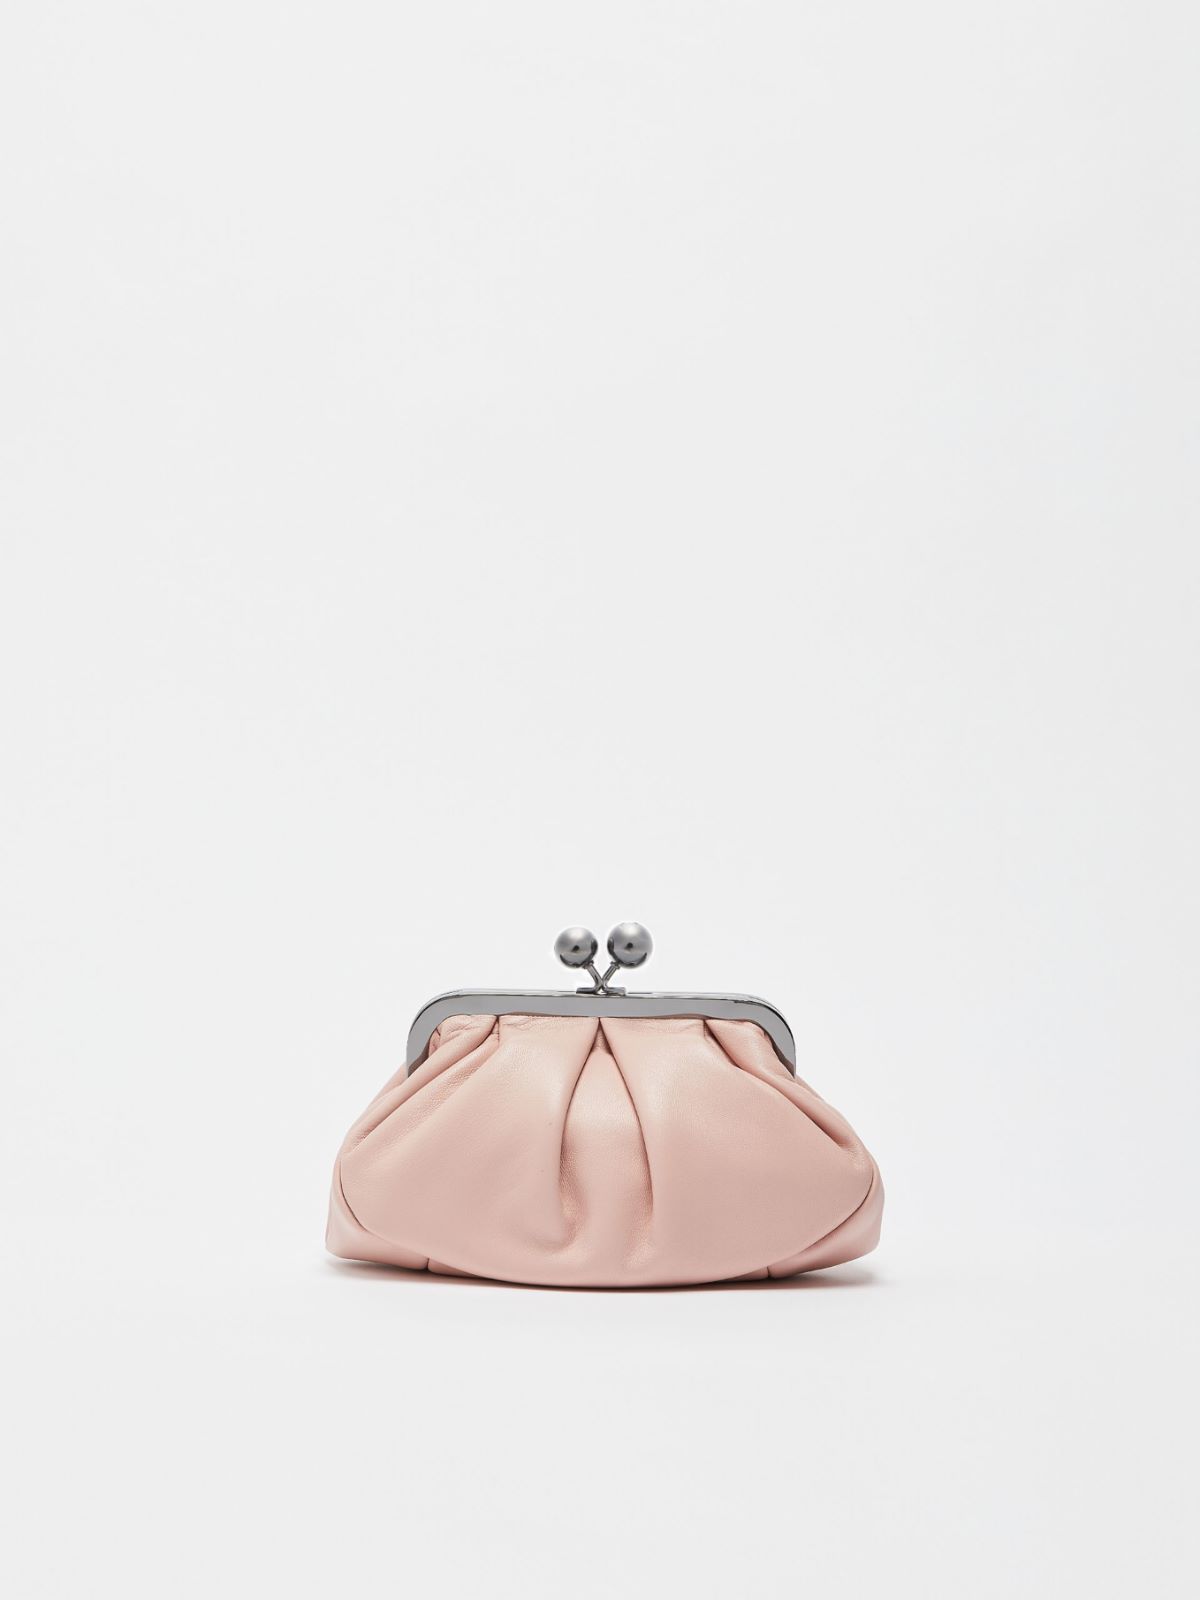 Small leather Pasticcino Bag - ANTIQUE ROSE - Weekend Max Mara - 3